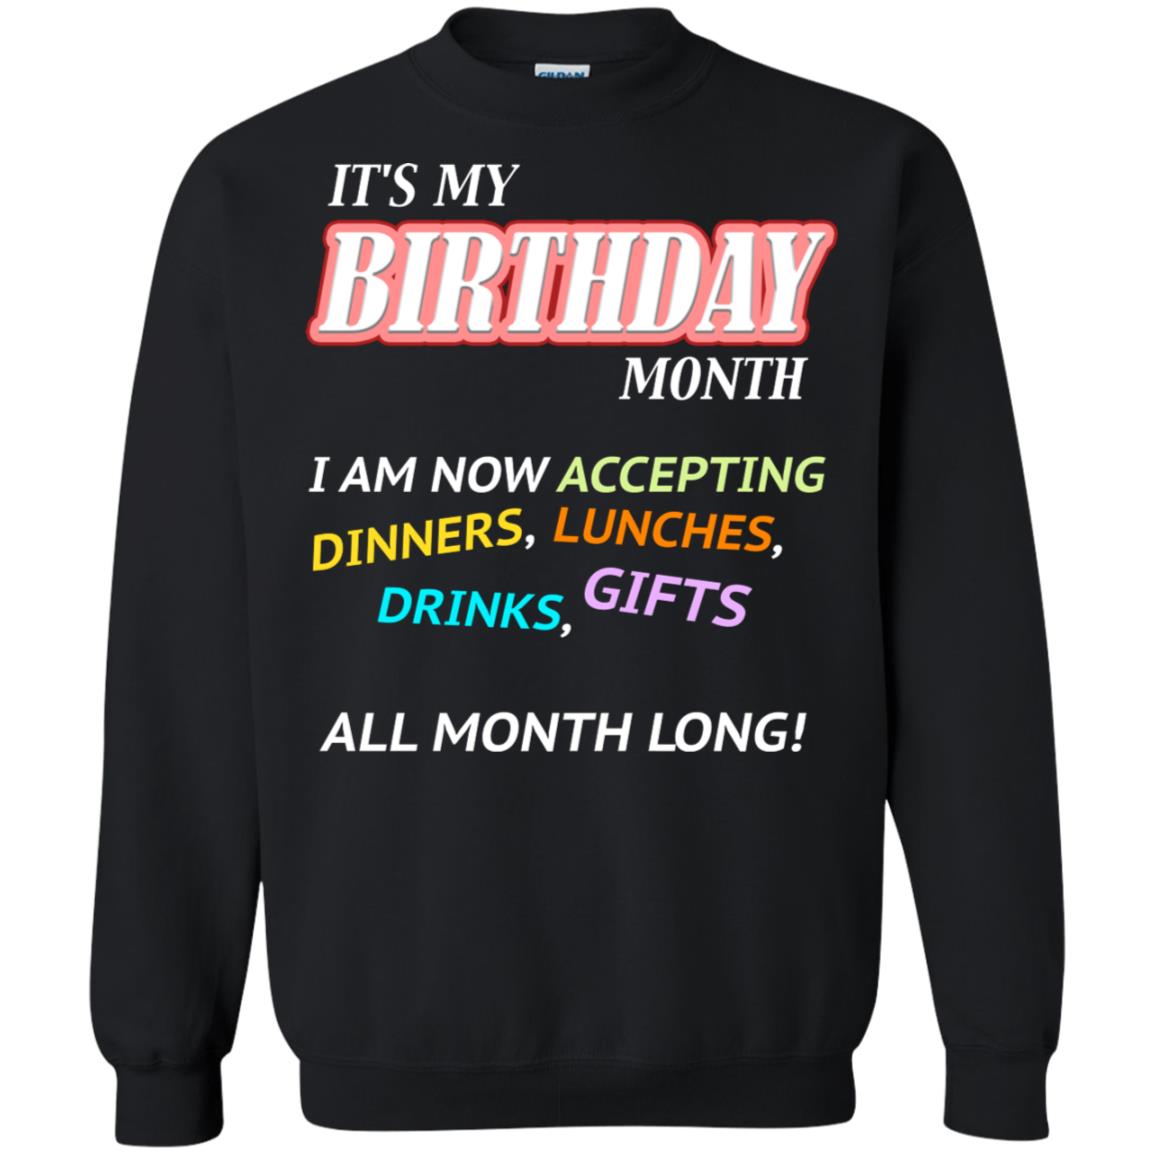 It's My Birthday Month I Am Accepting Dinner Luches Drinks Gifts All Month LongG180 Gildan Crewneck Pullover Sweatshirt 8 oz.